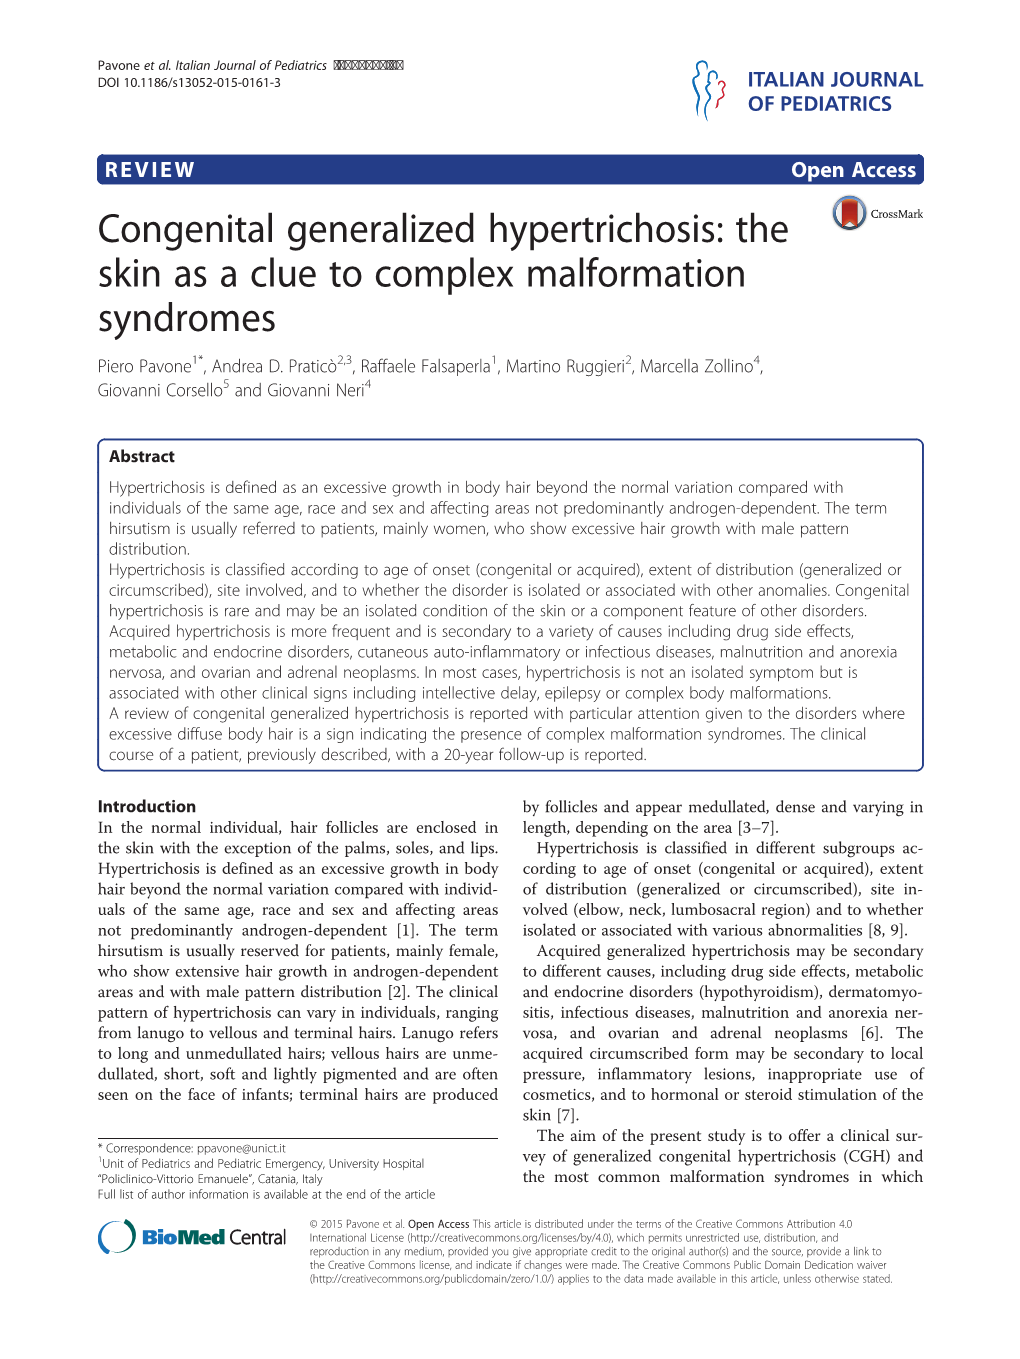 Congenital Generalized Hypertrichosis: the Skin As a Clue to Complex Malformation Syndromes Piero Pavone1*, Andrea D